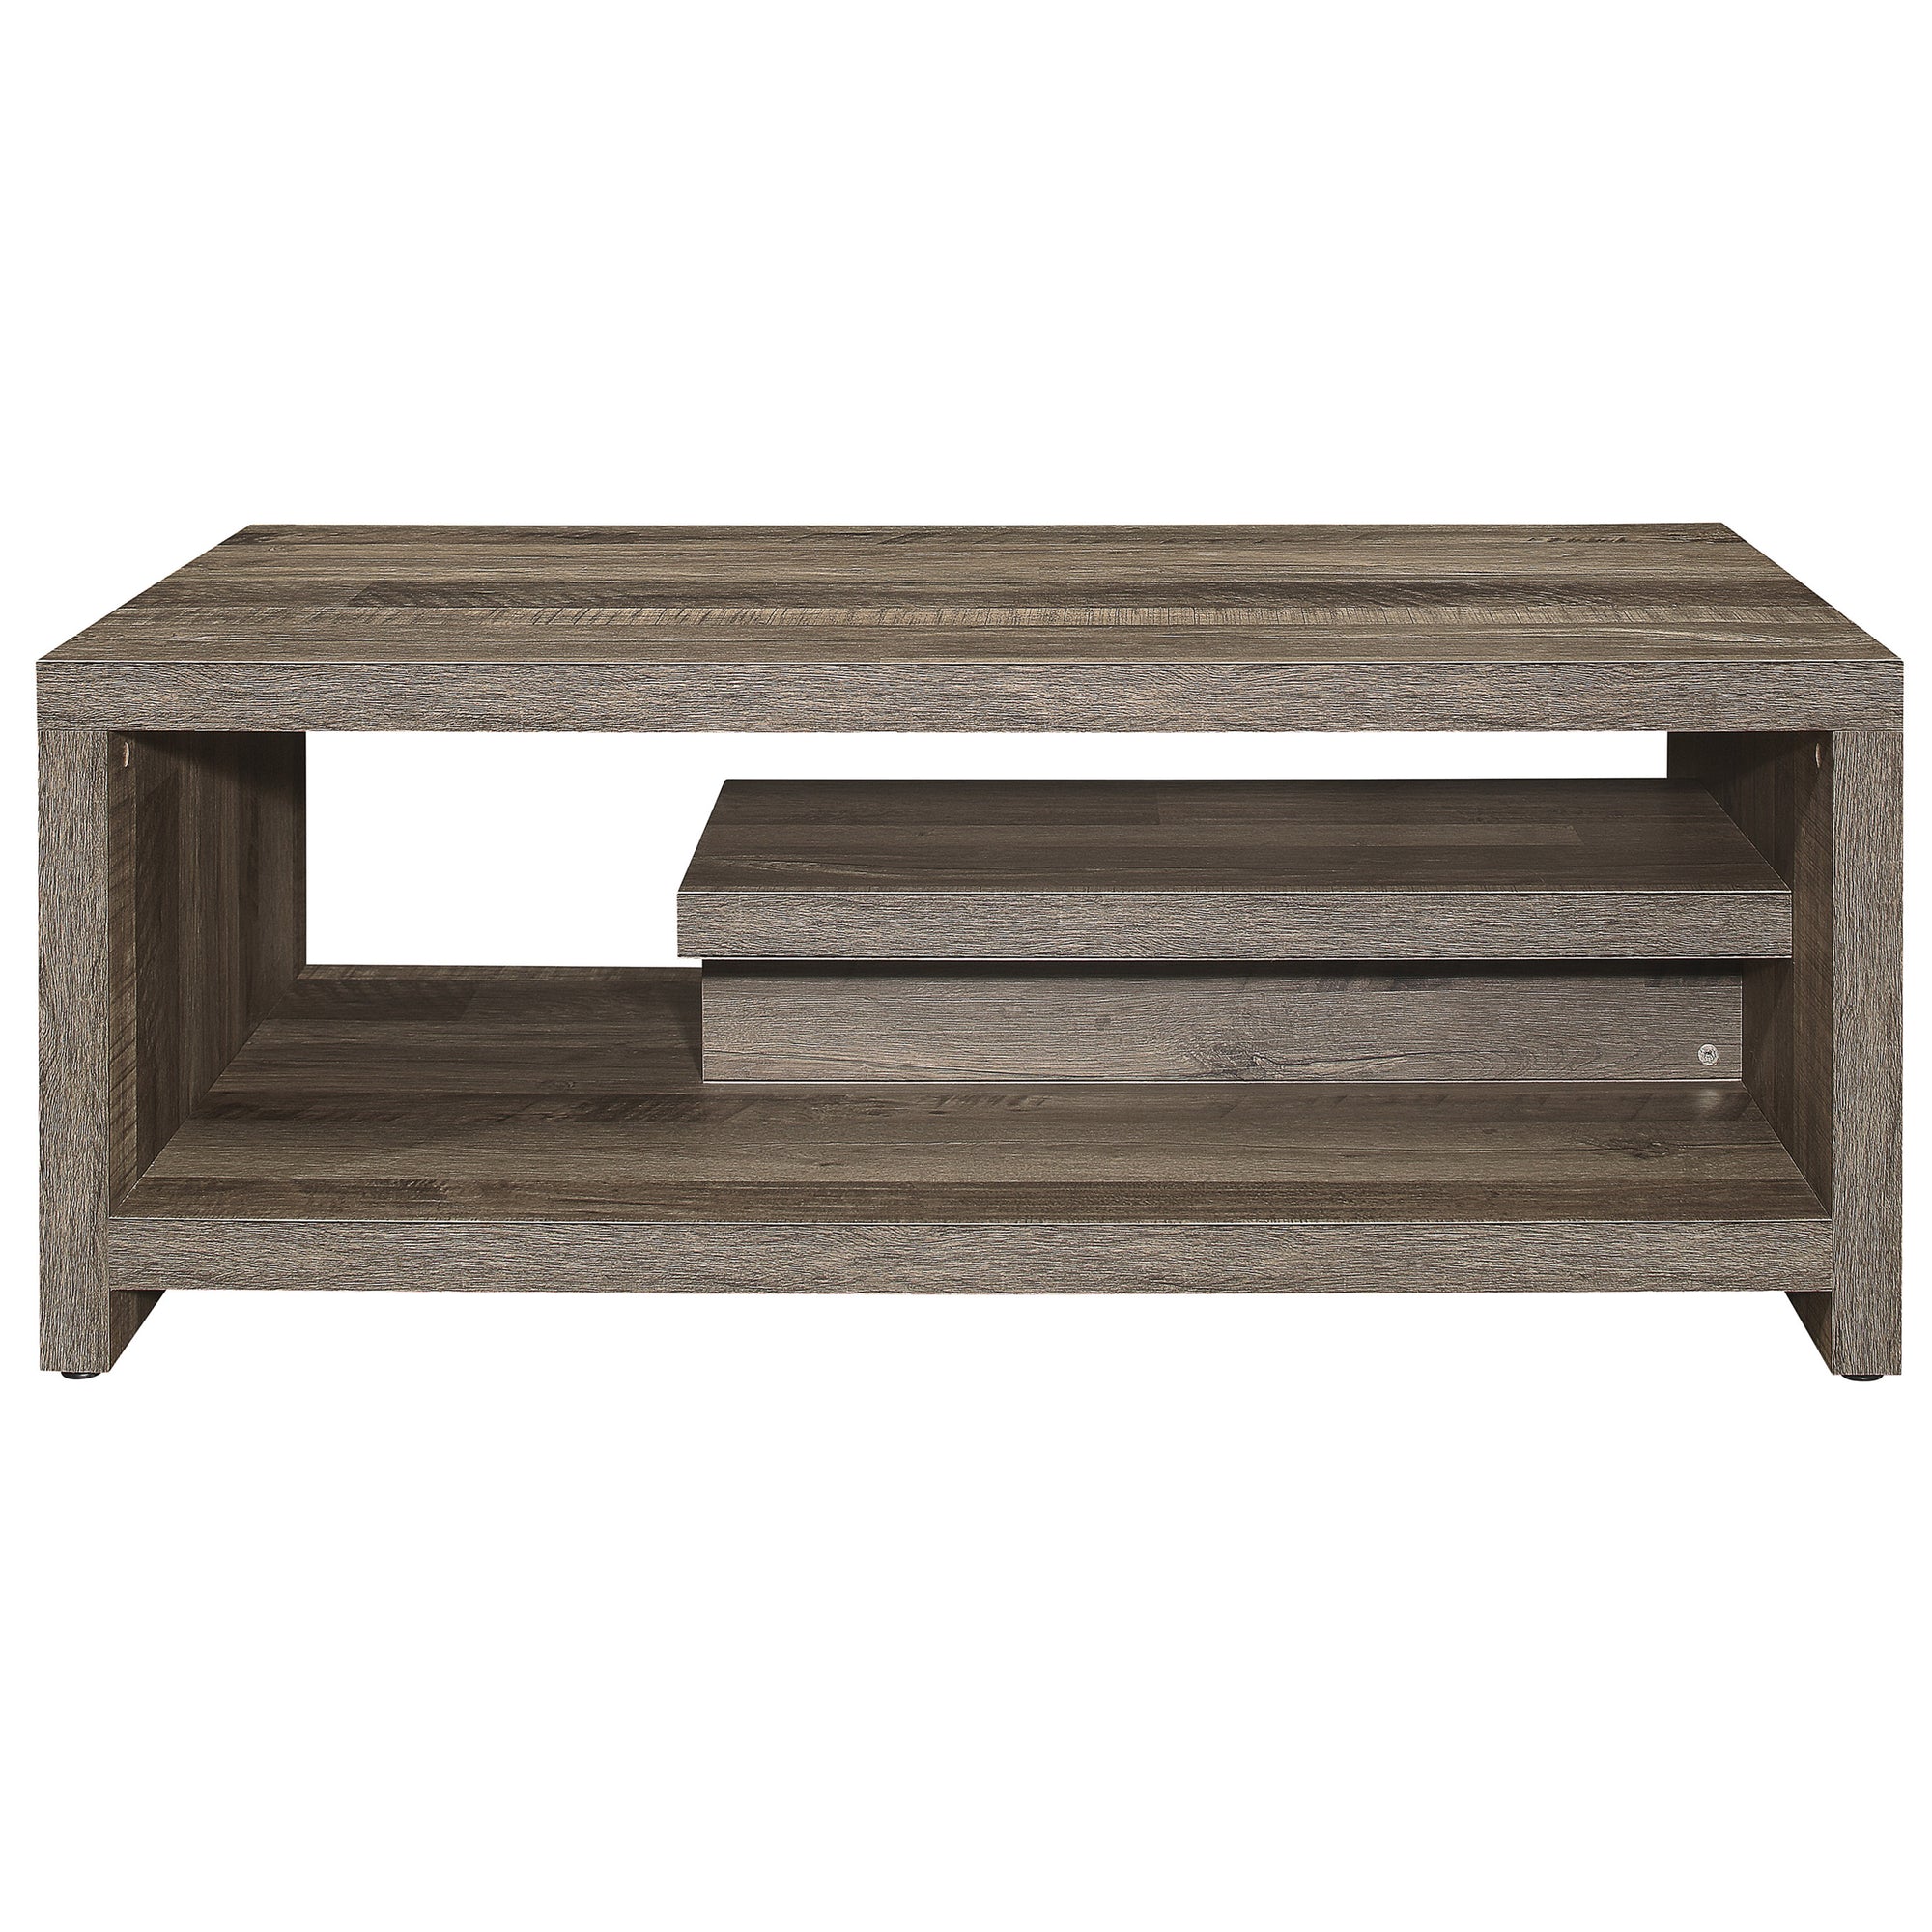 Hilles Coffee Table